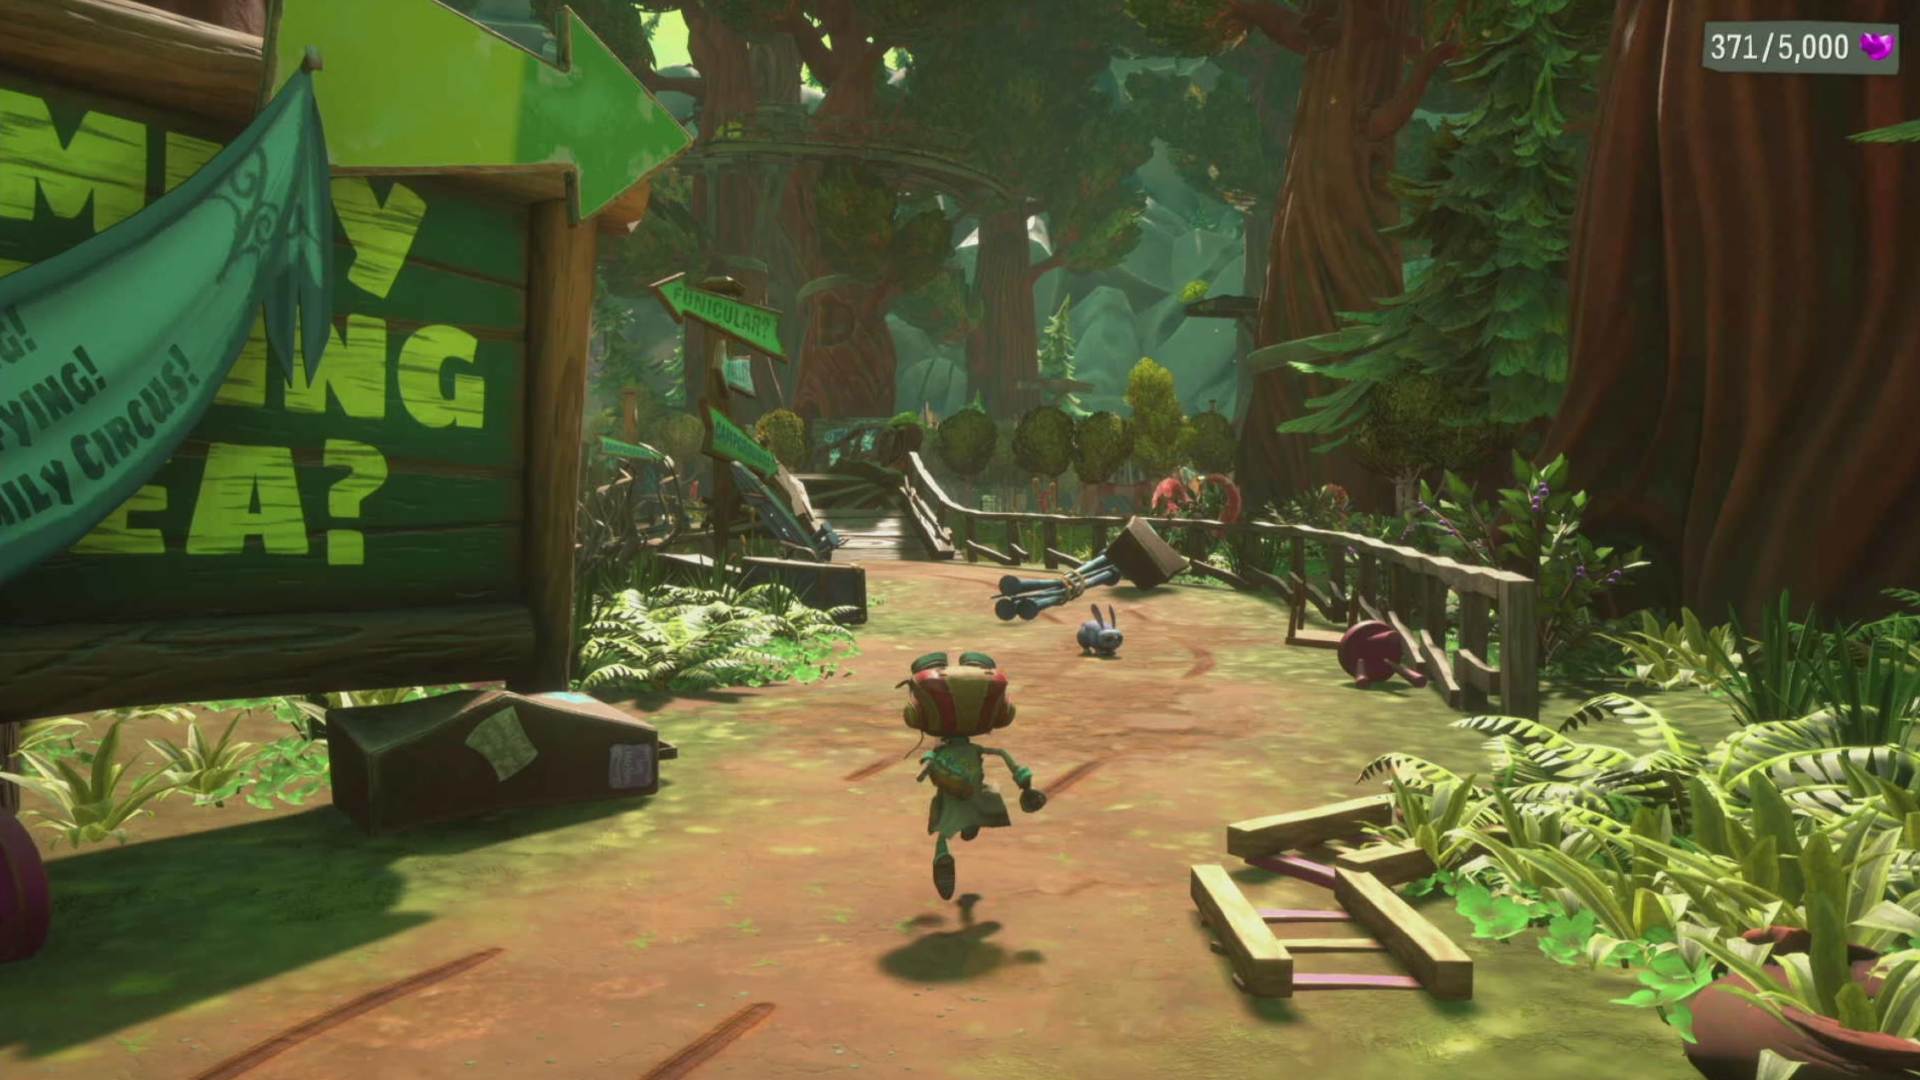 Psychonauts 2 Aqauto family location: Raz can be seen running along a path through the woods, with the fence and other items strewn about.